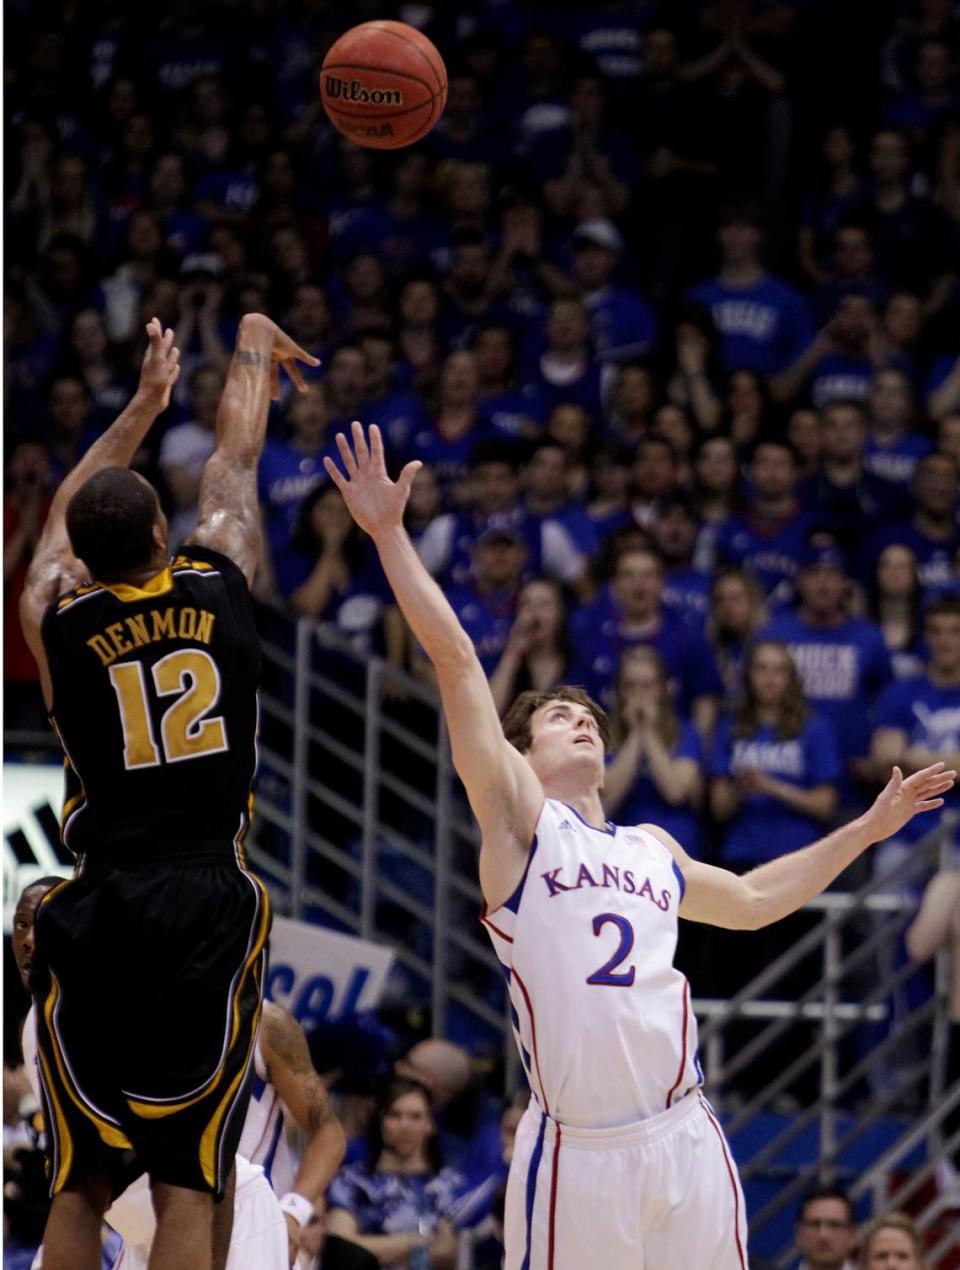 MU’s Marcus Denmon poured in 13 first-half points to lead MU to a 44-32 halftime lead on Feb. 25, 2012 at Allen Fieldhouse in Lawrence but the Jayhawks won 87-86 in overtime.